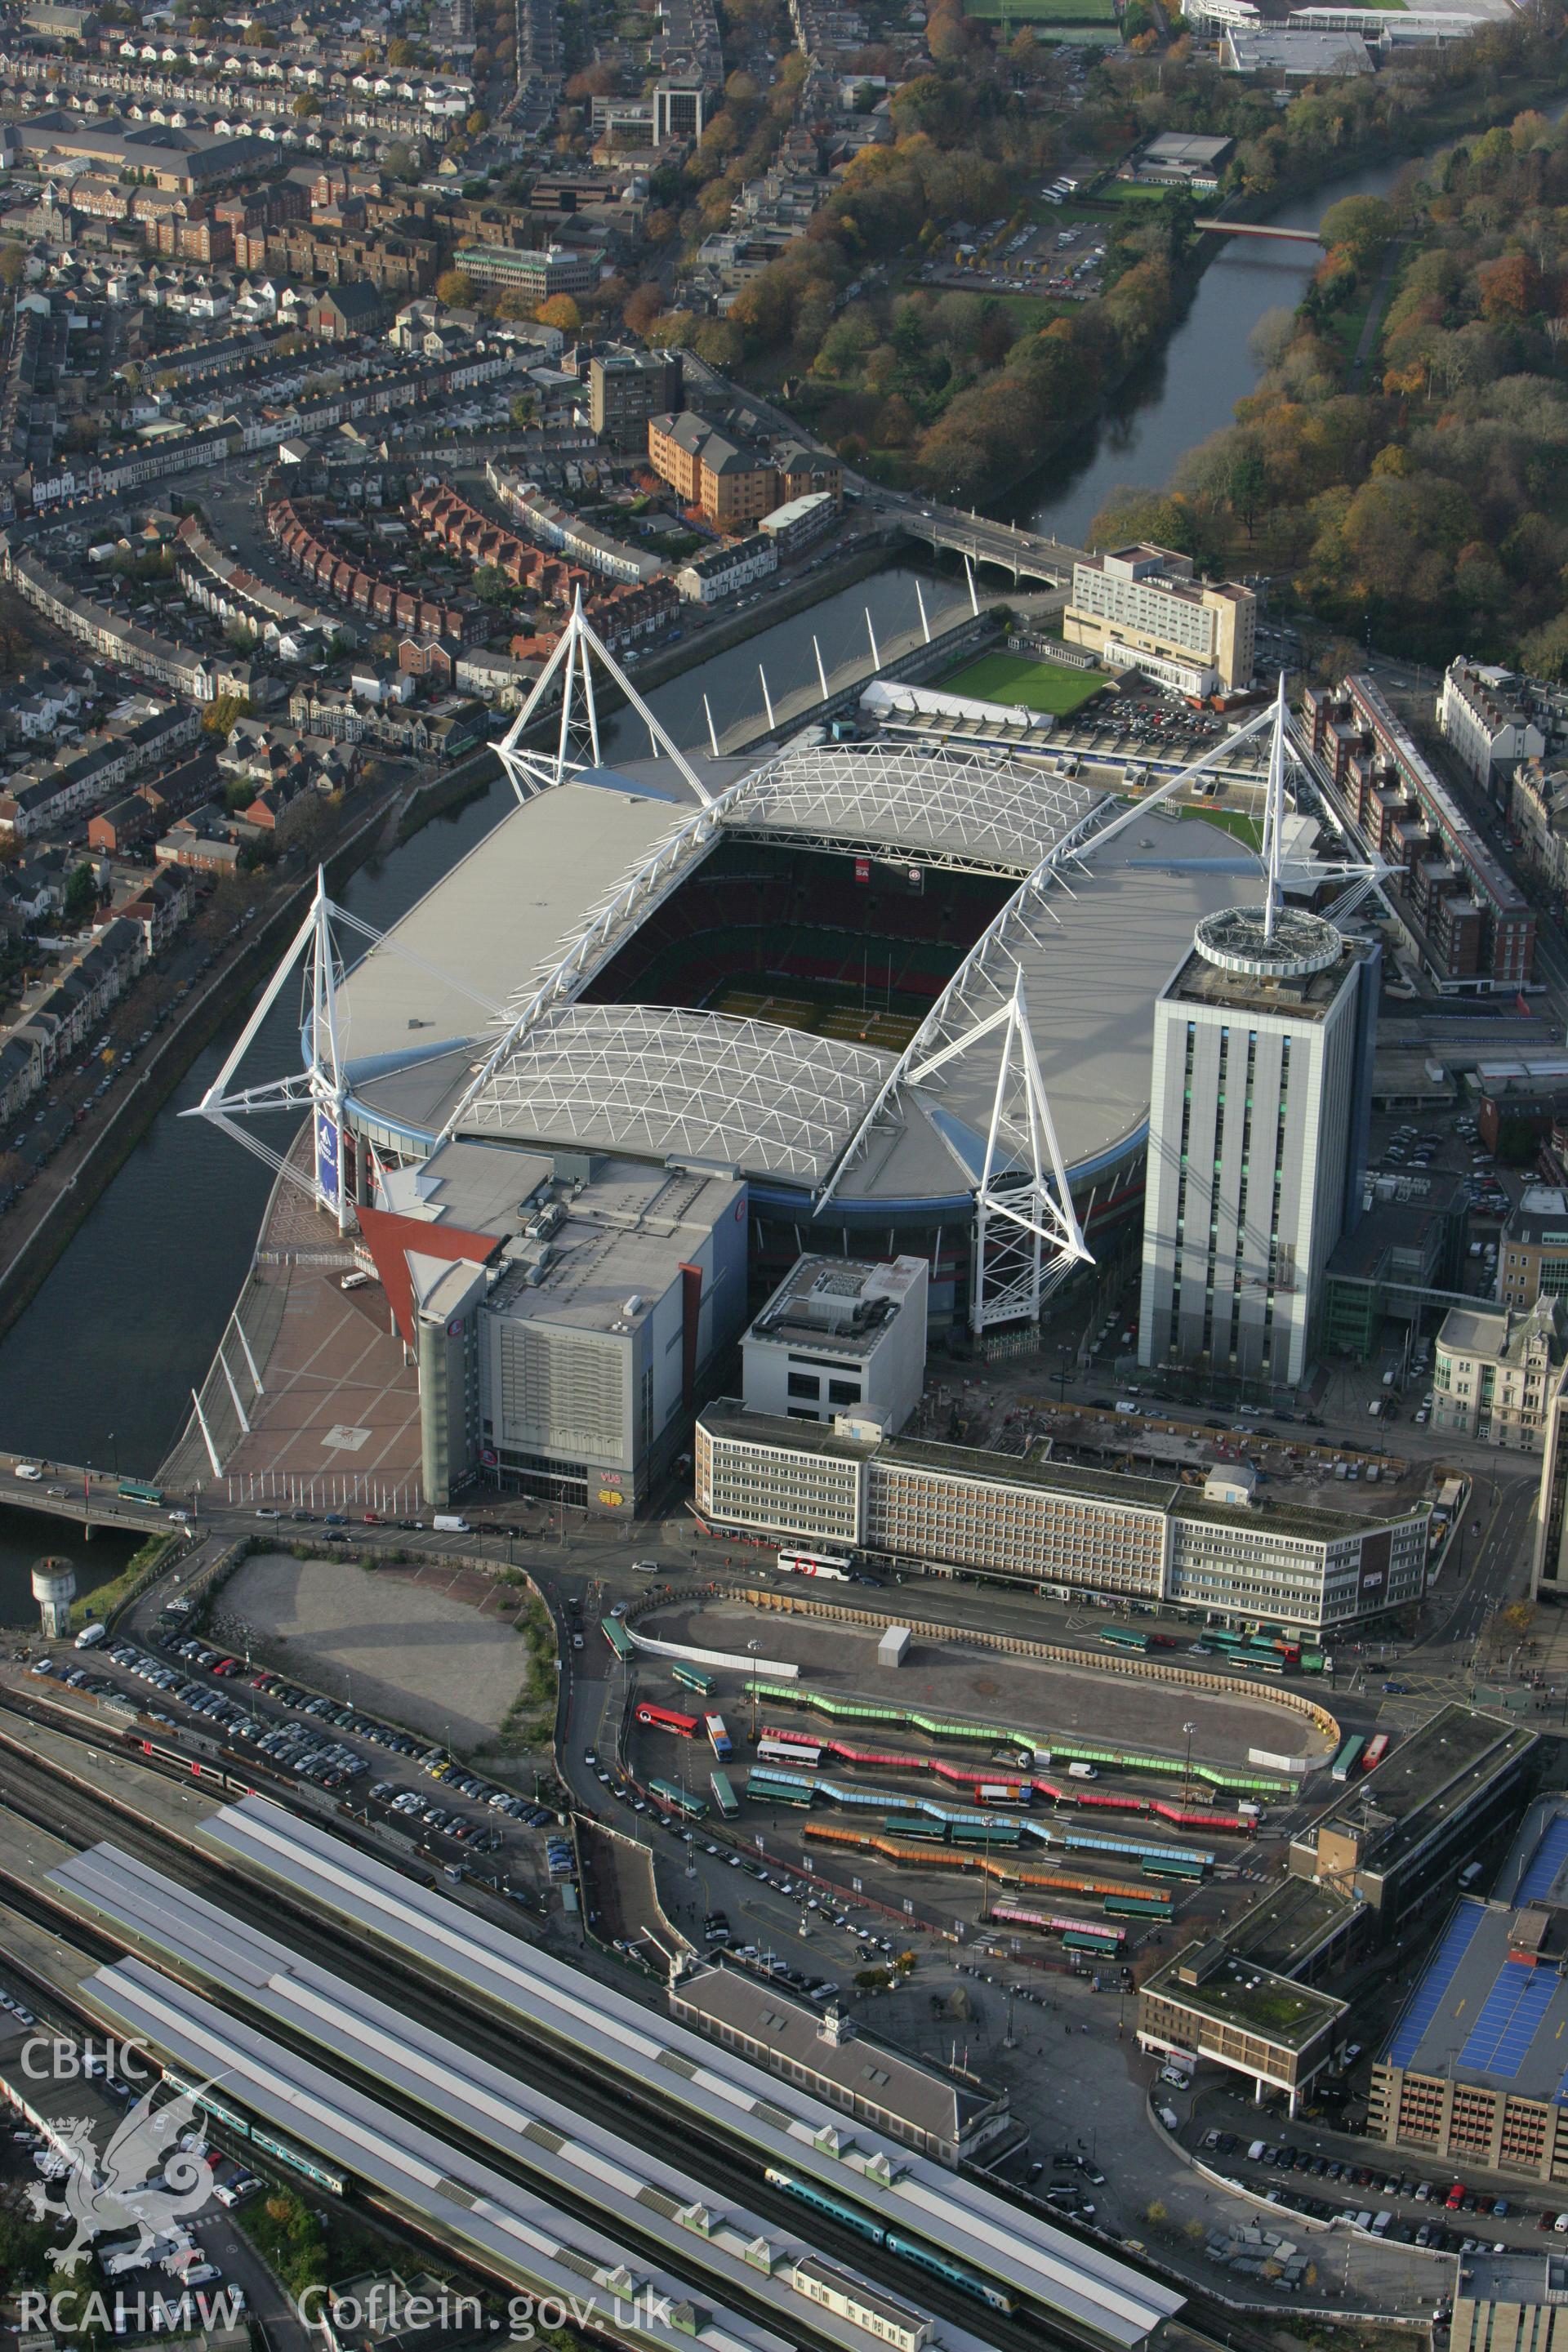 RCAHMW colour oblique photograph of Cardiff Millennium Stadium. Taken by Toby Driver on 12/11/2008.